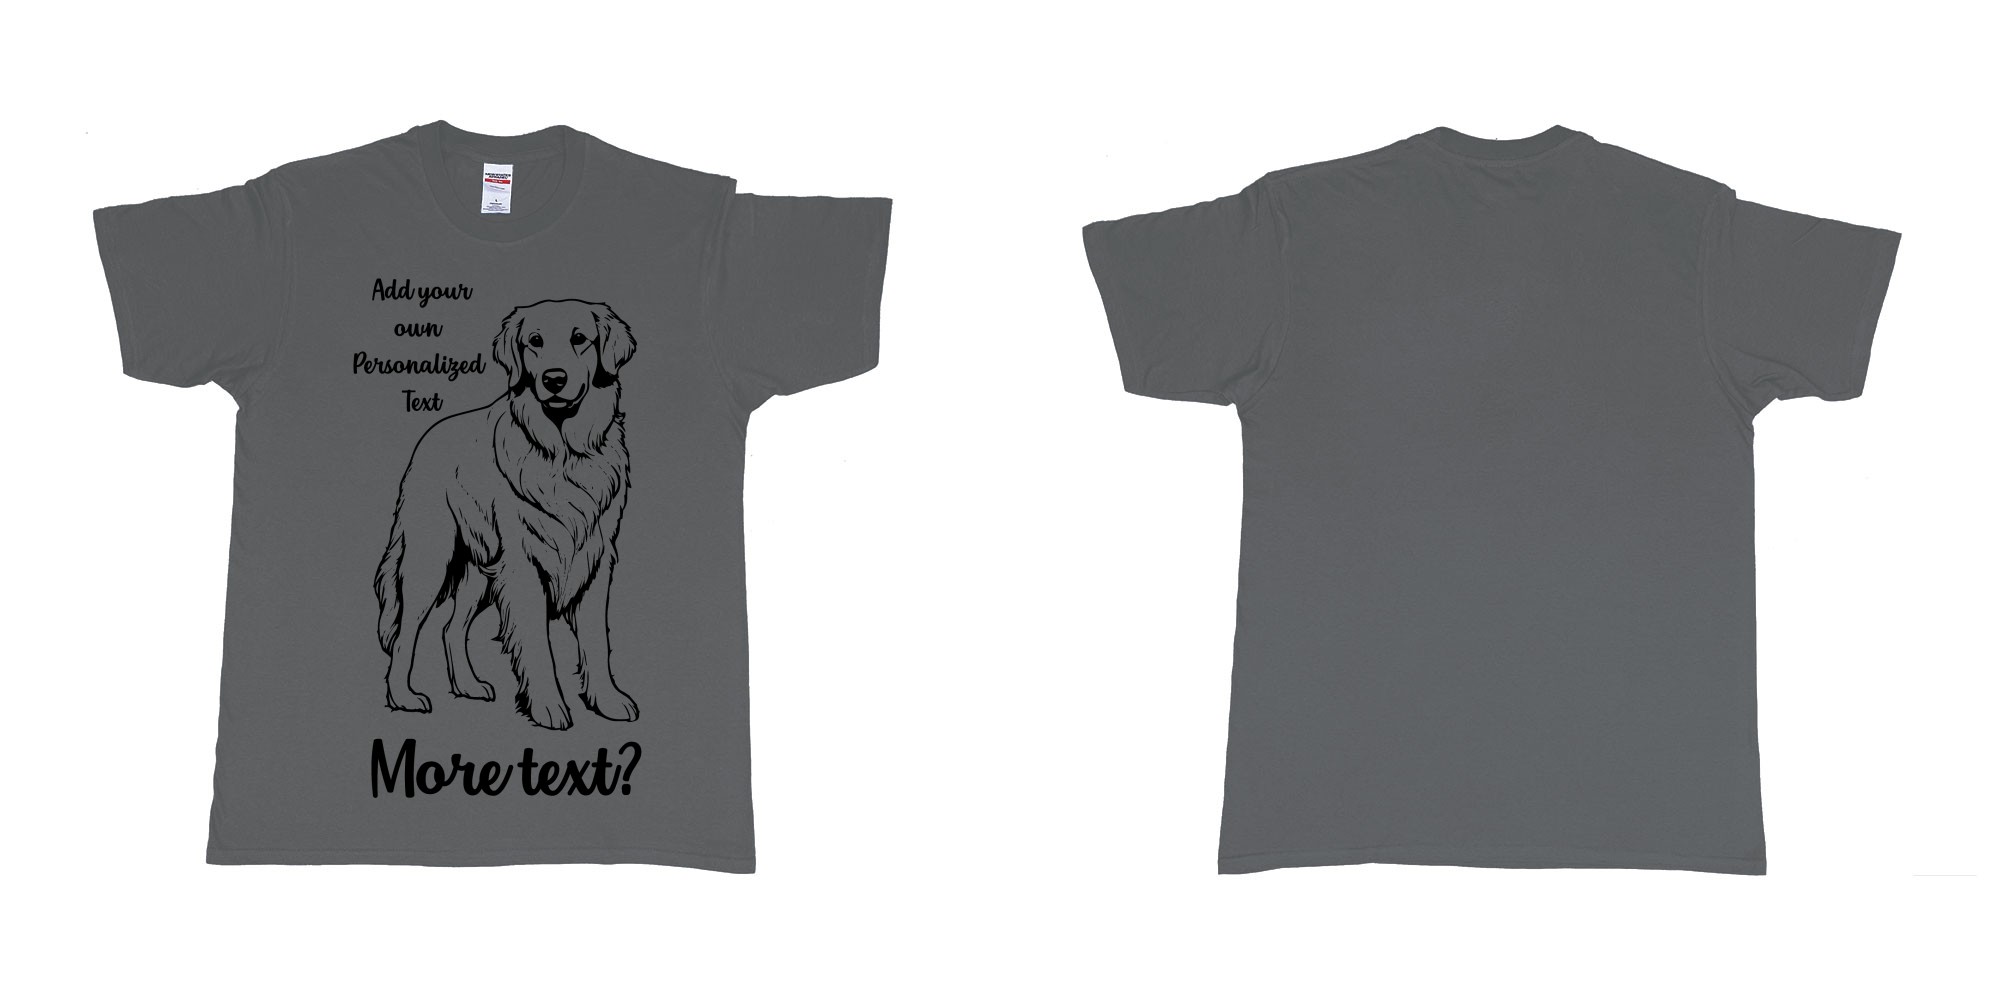 Custom tshirt design golden retriever dog breed personalized text in fabric color charcoal choice your own text made in Bali by The Pirate Way